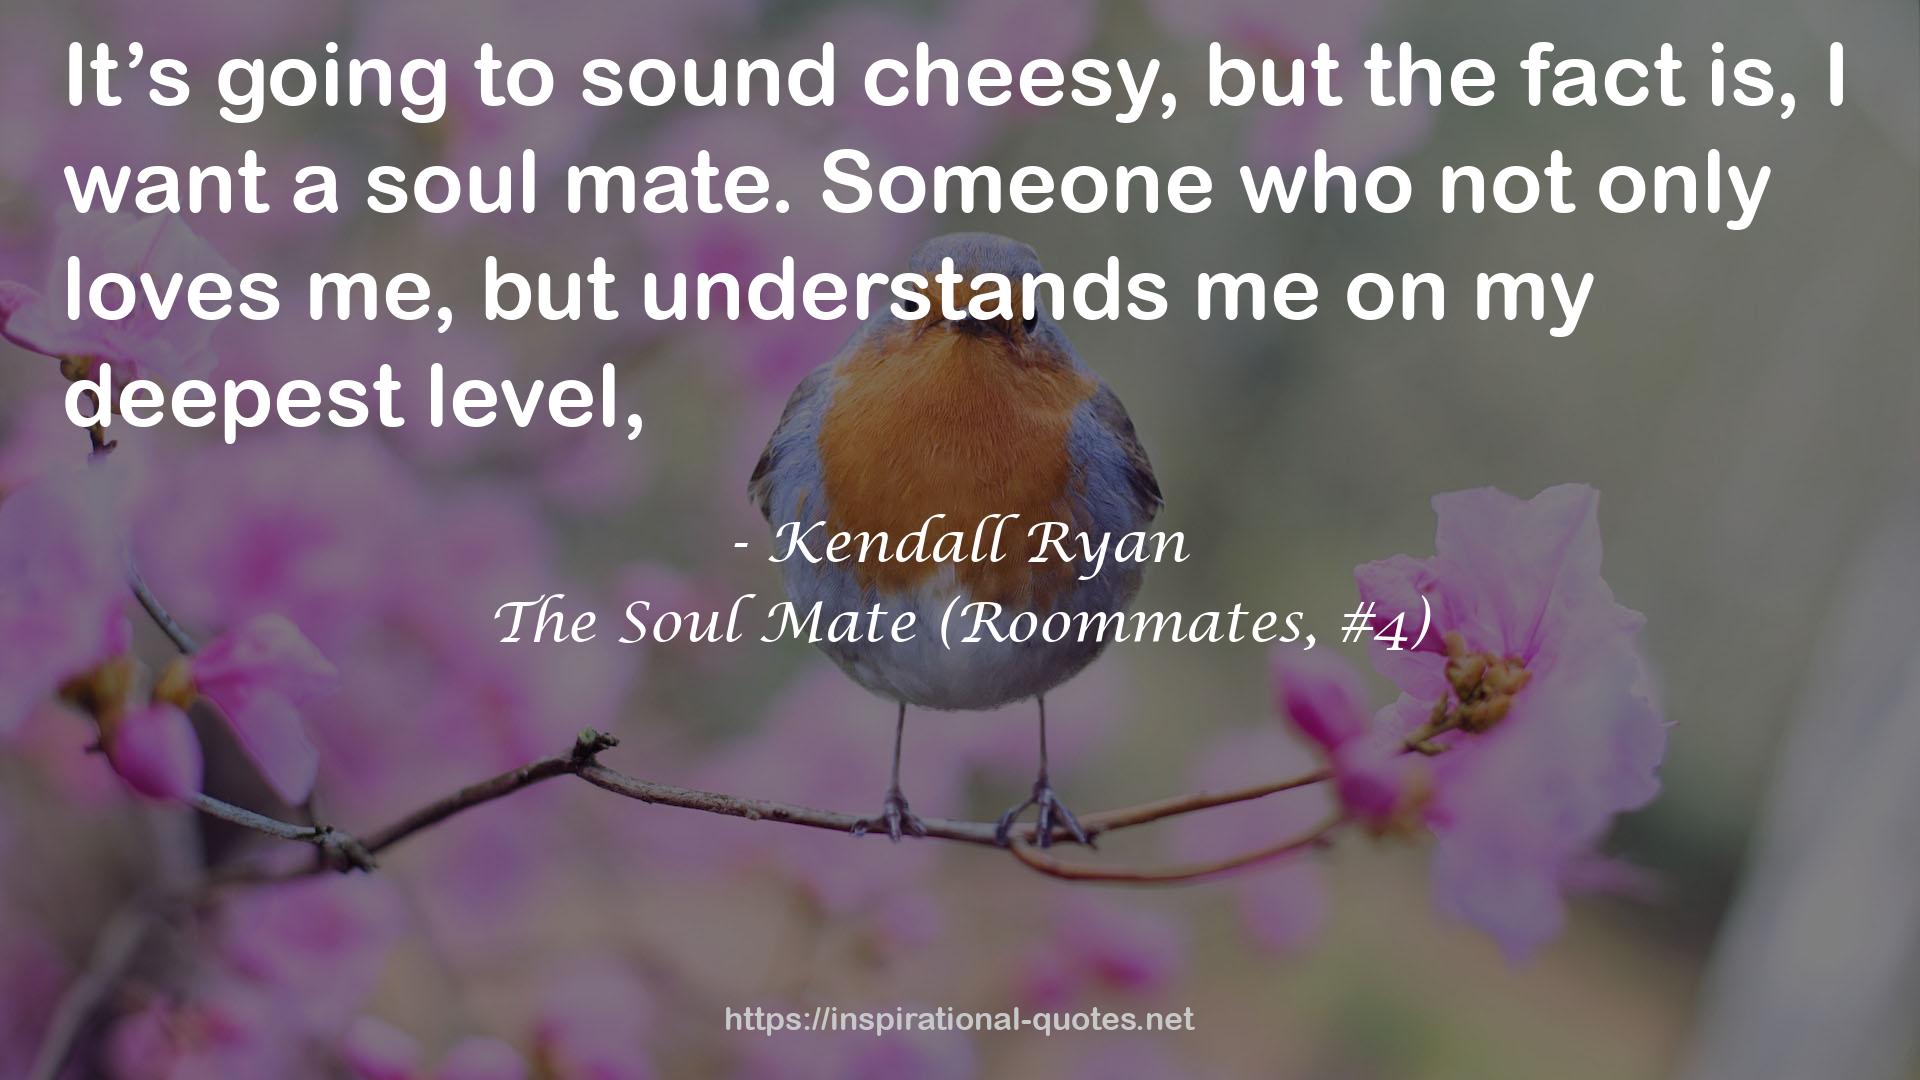 The Soul Mate (Roommates, #4) QUOTES